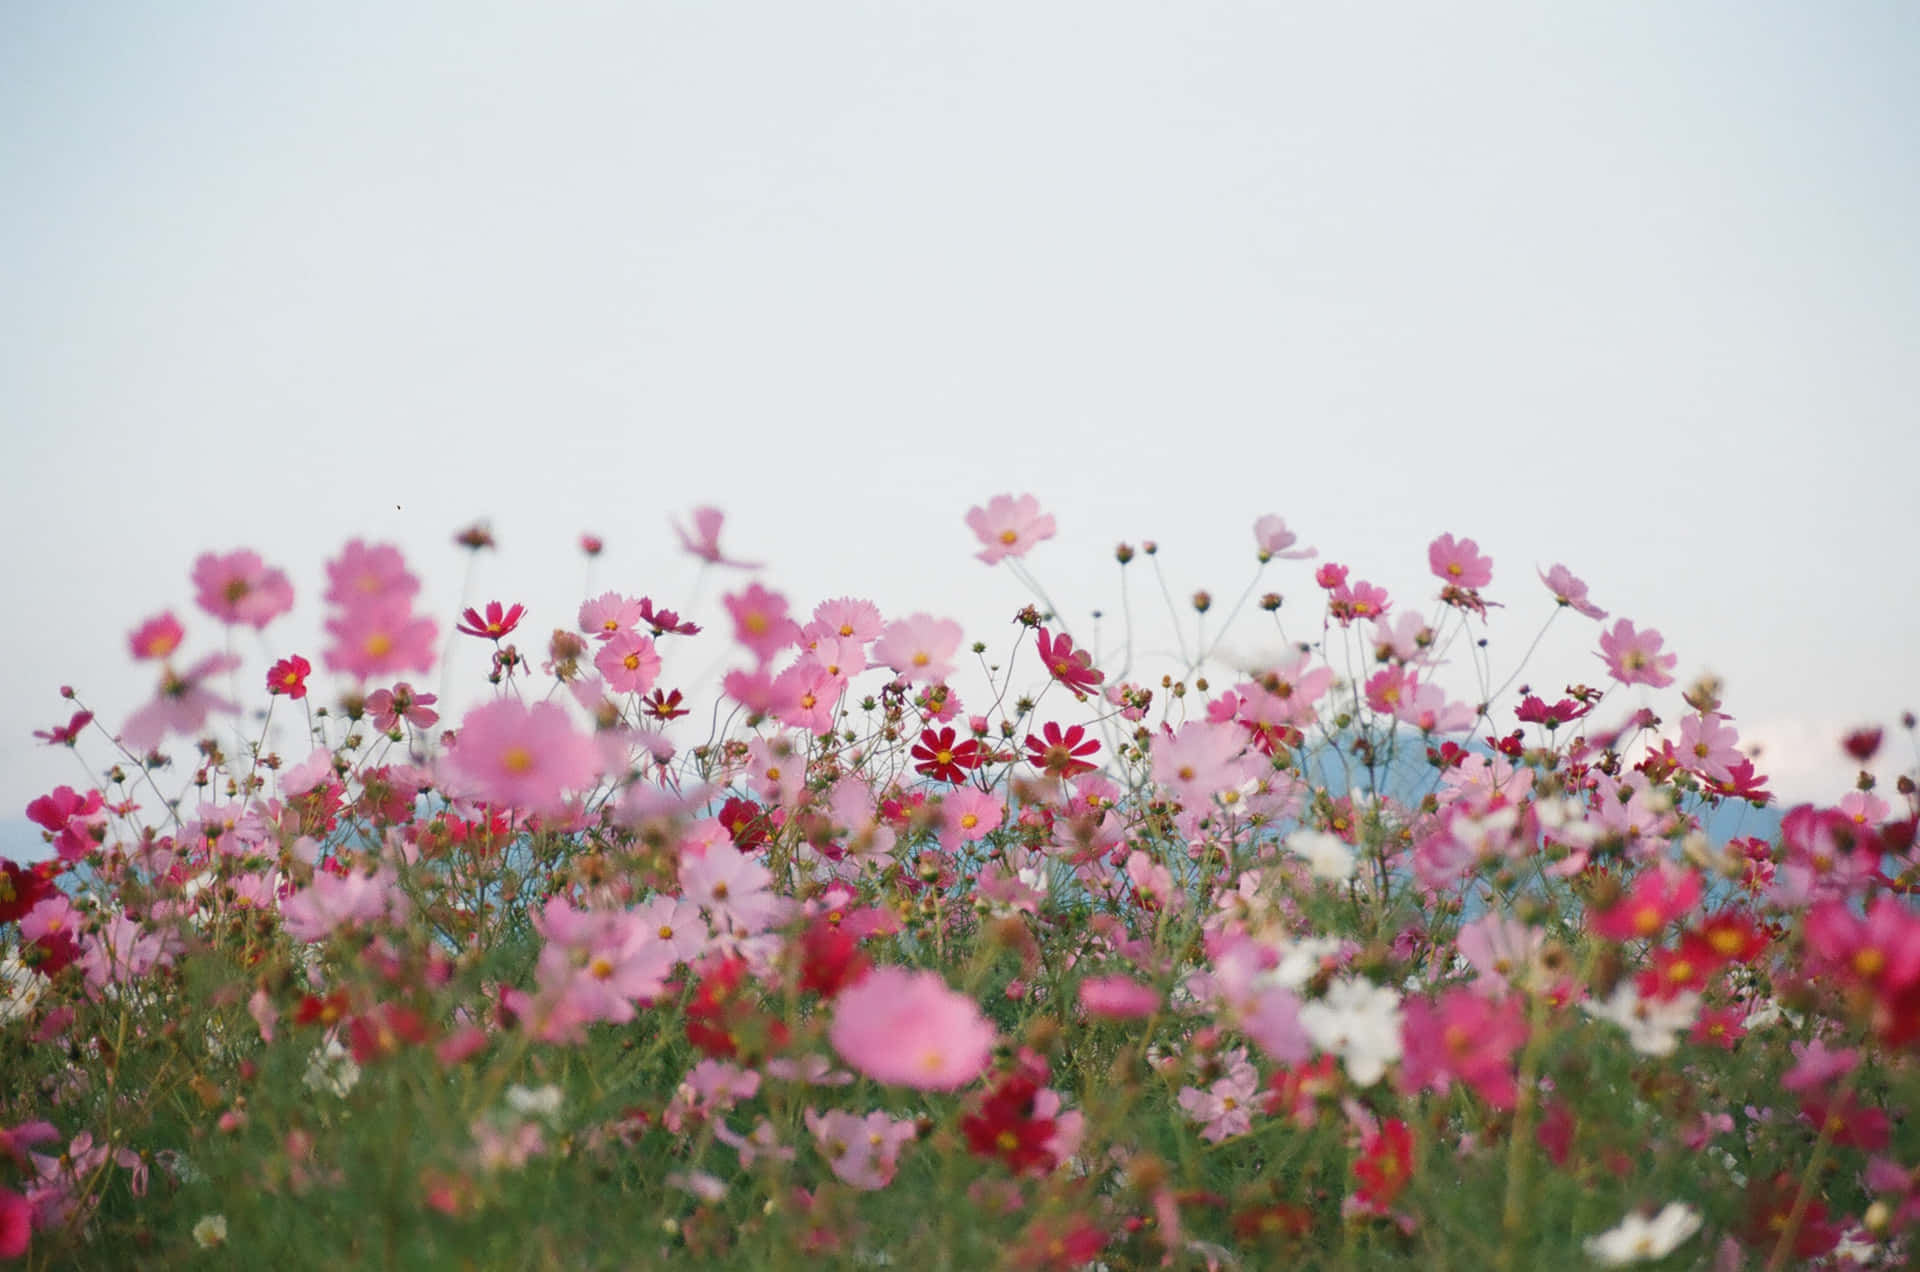 Download Enjoying the beauty of nature from a peaceful Flower Field ...